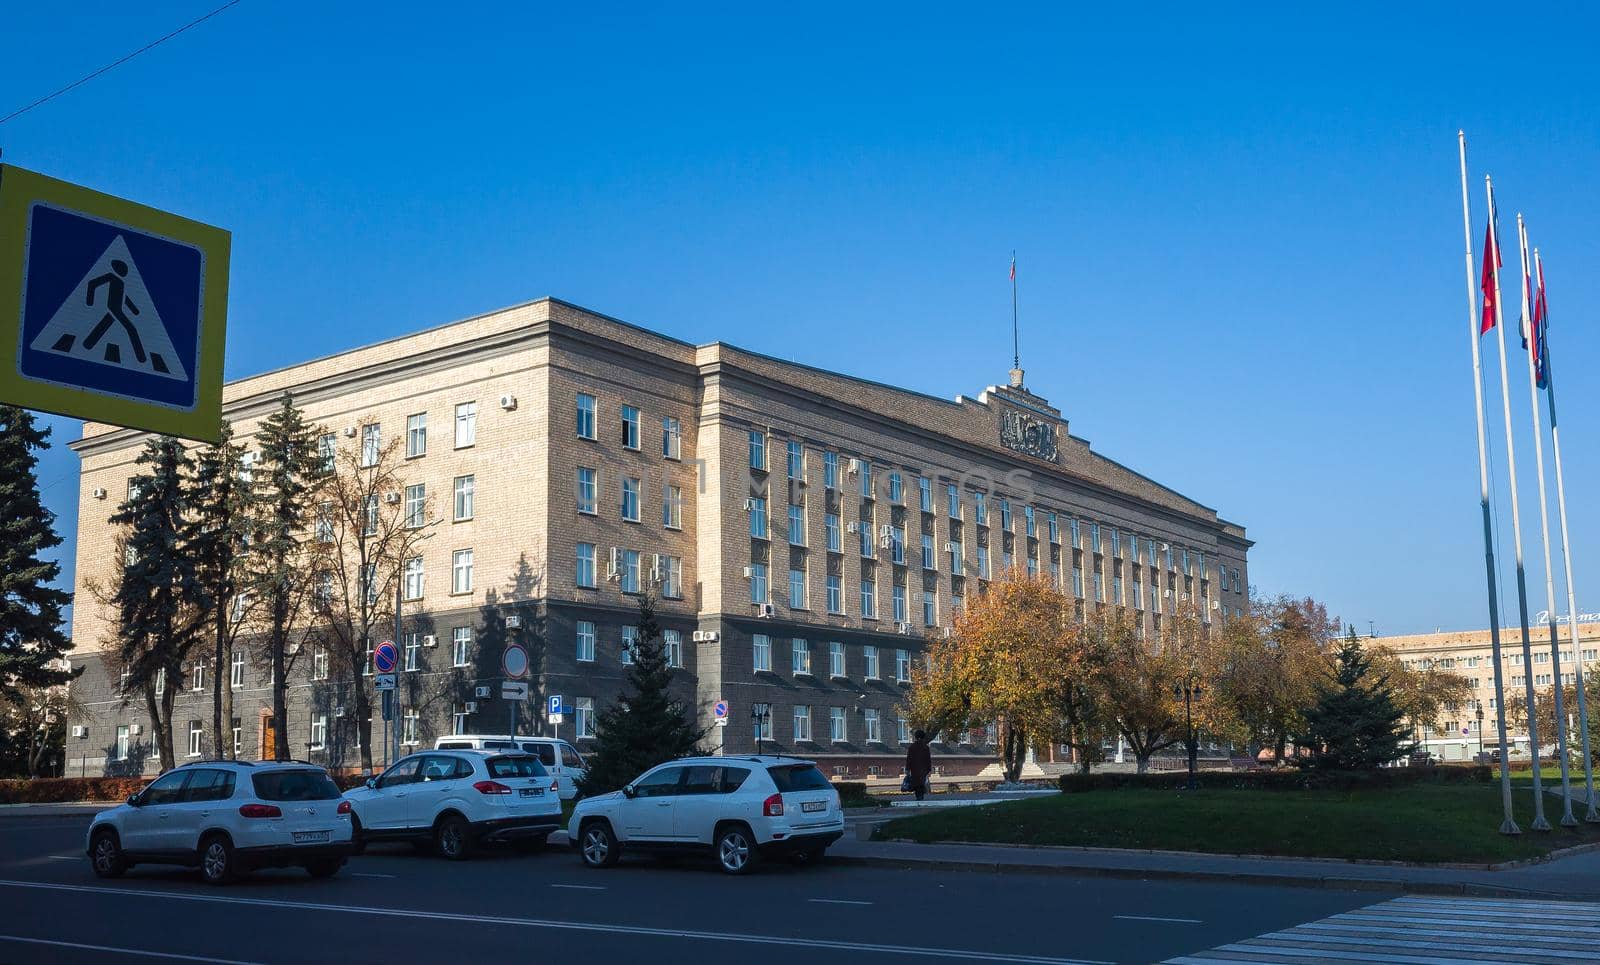 October 22, 2018, Oryol, Russia. The building of the regional administration on Lenin Square in Orel.